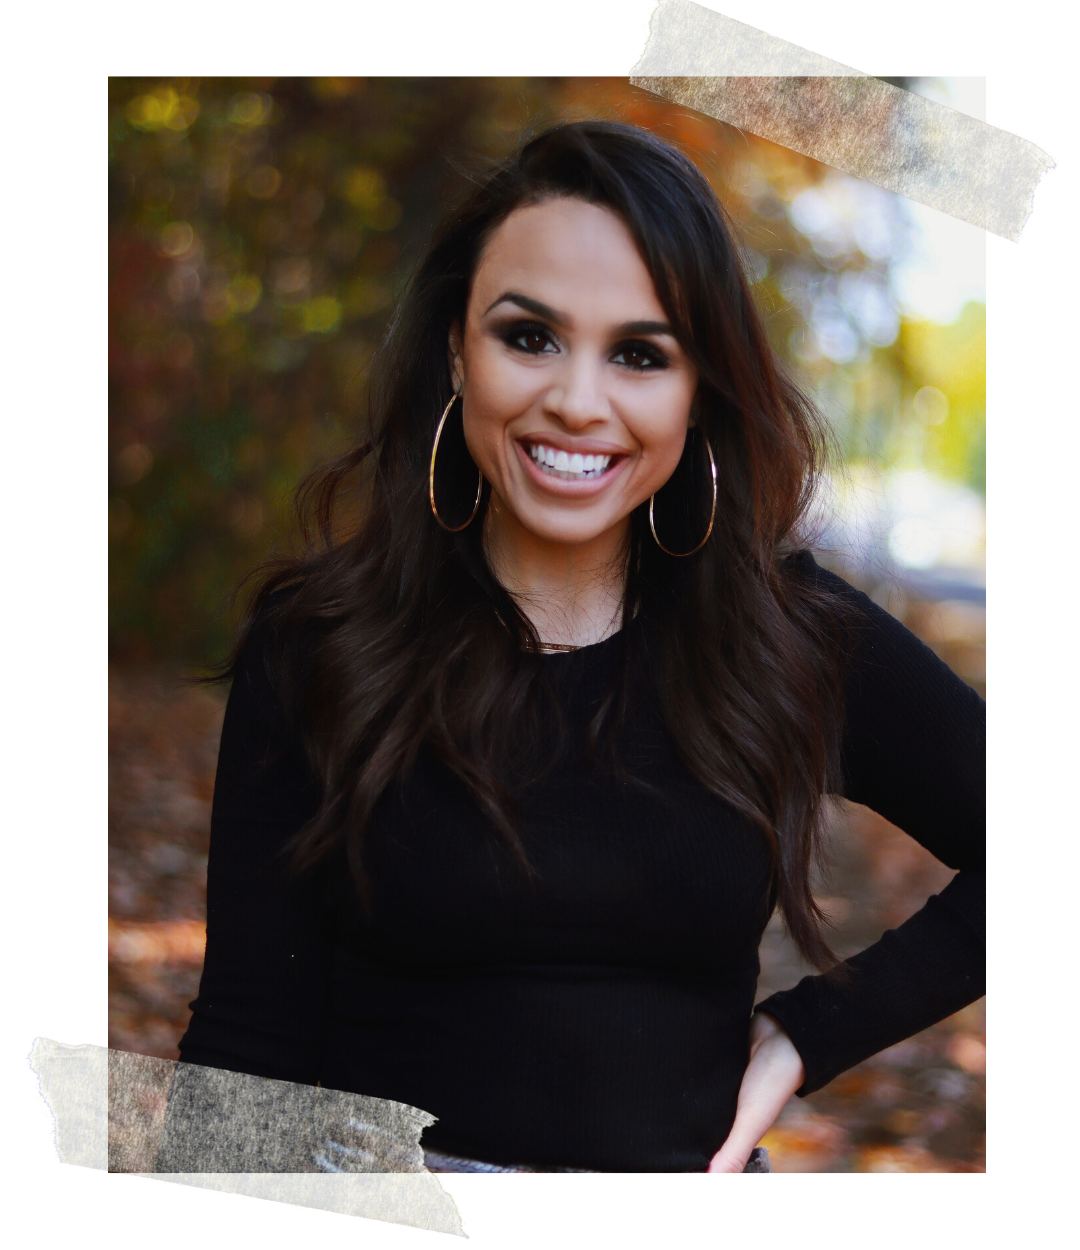 Amanda Pittman is the wife to Michael Pittman and mother of Elijah and Lily. Amanda is the author of three books. Her titles include, Love Your First Year of Marriage, Reflecting God’s Beauty, and CHANGE.Amanda is the Founder of Confident Woman Co.,…